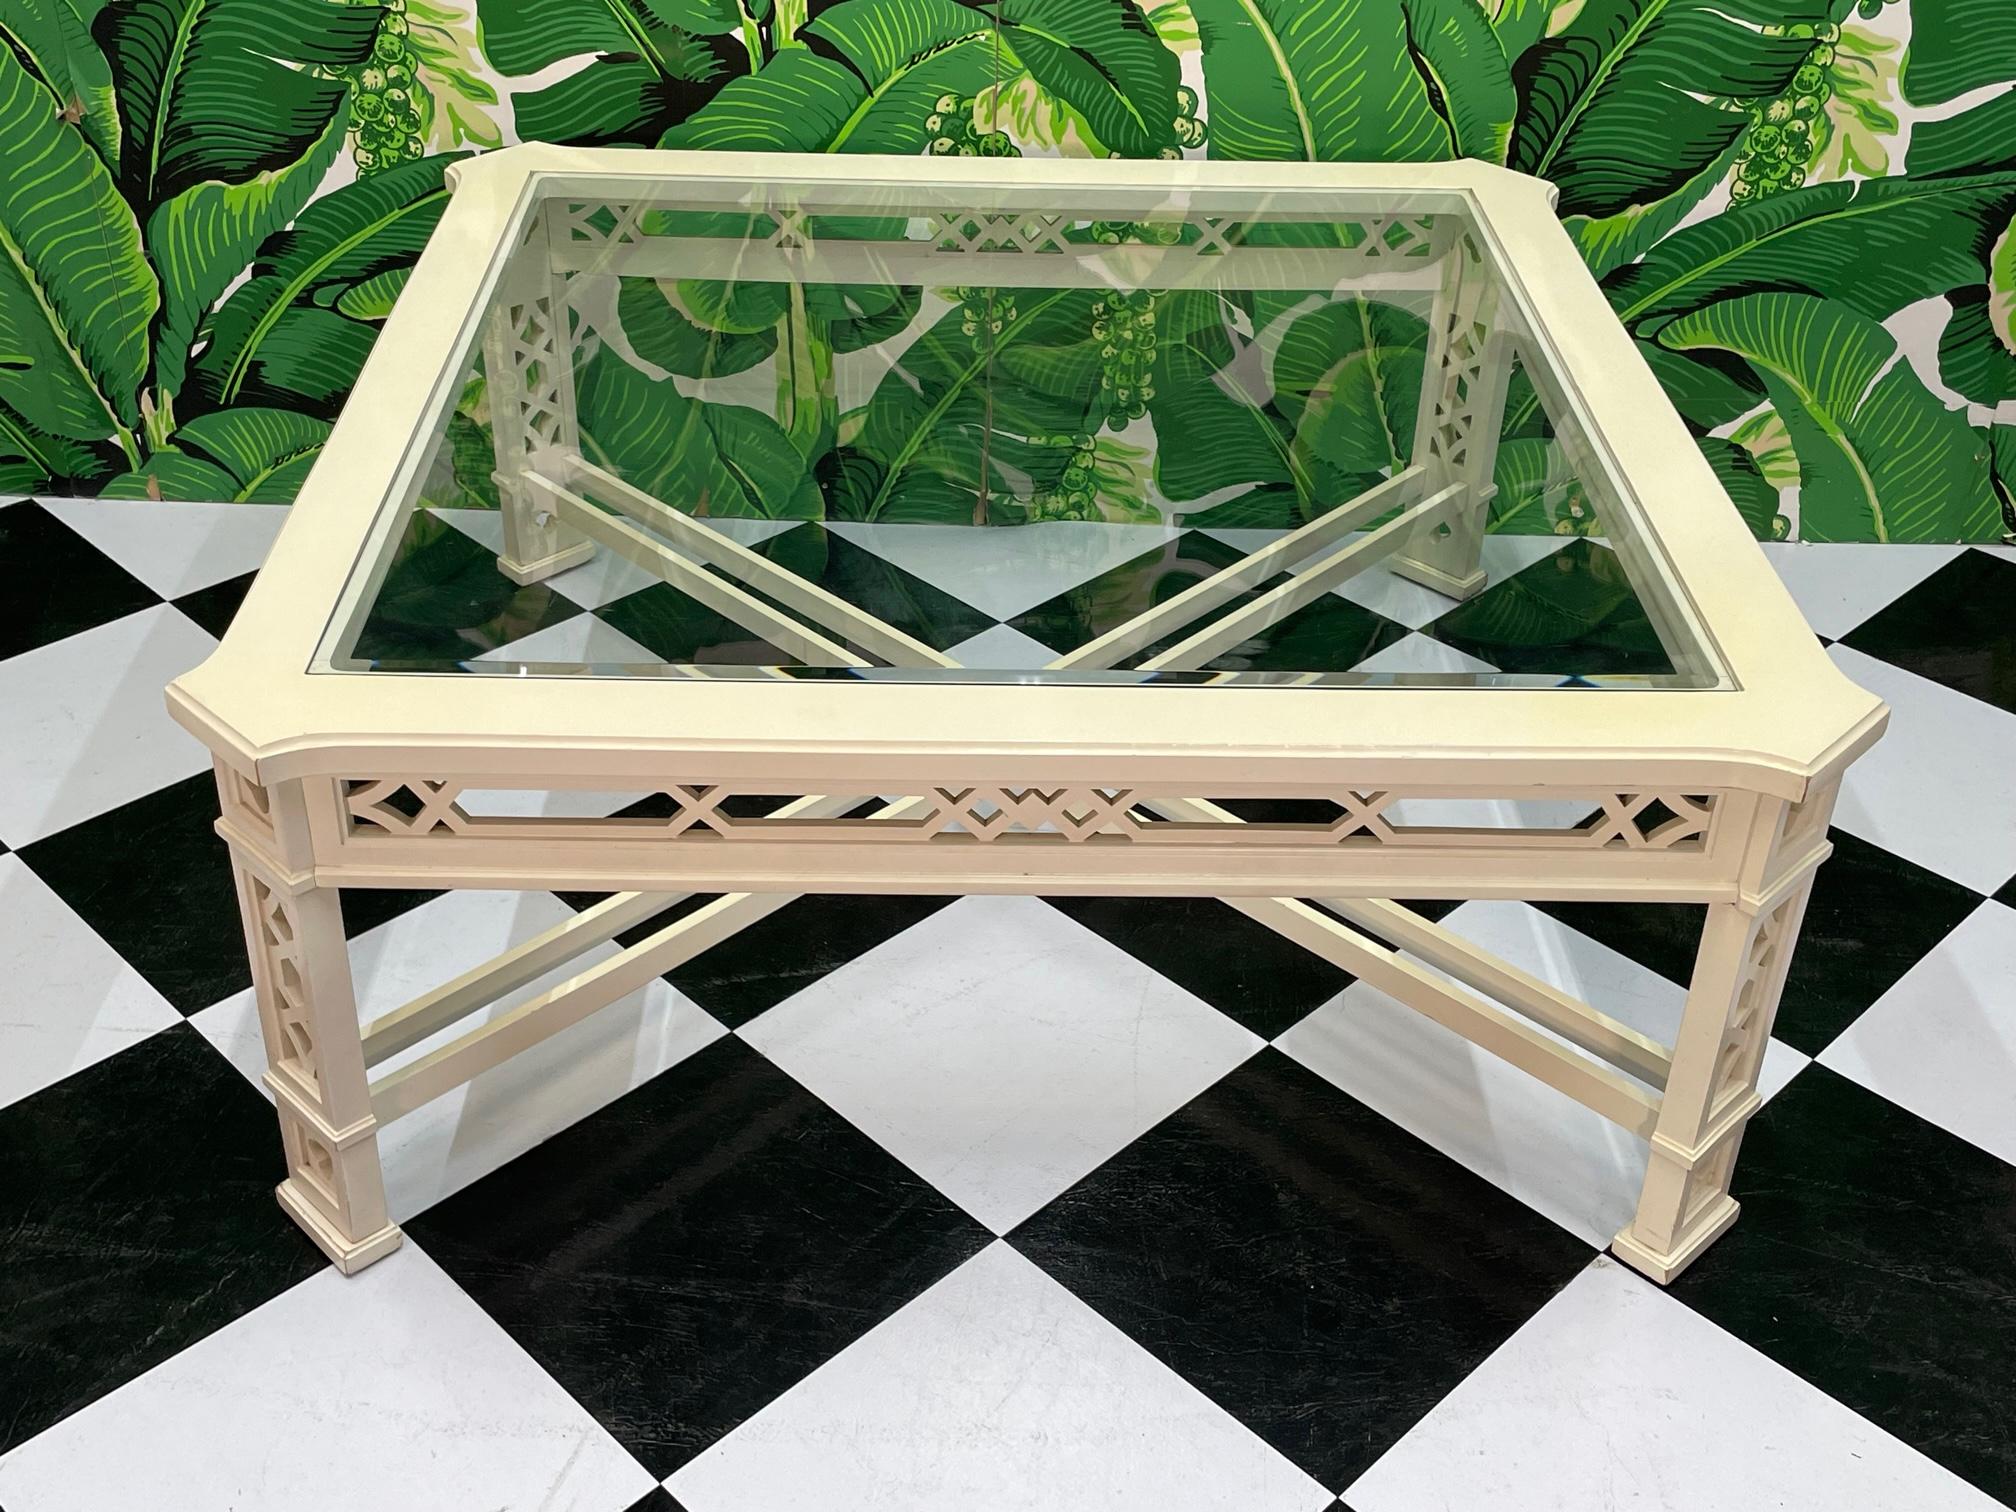 Vintage coffee/cocktail table by Thomasville features ornate modern fretwork, double X stretchers, and a glass top. Good condition with minor imperfections consistent with age, see photos for condition details.
For a shipping quote to your exact zip